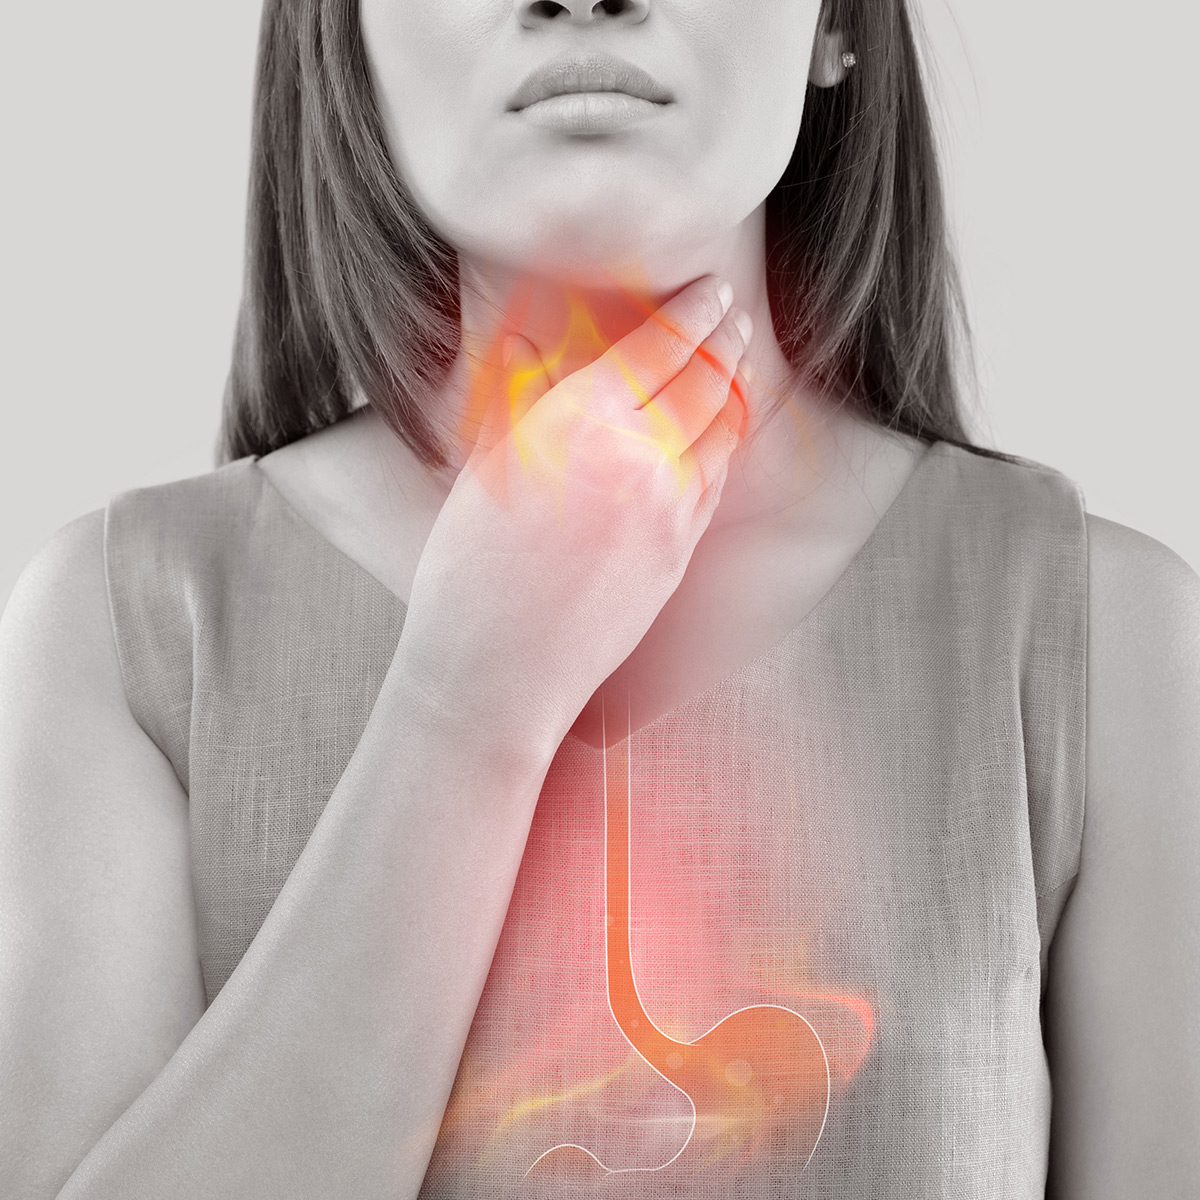 GASTROESOPHAGEAL REFLUX DISEASE (GERD) – Symptoms, Causes, Natural Home Remedies and Reflux Diet